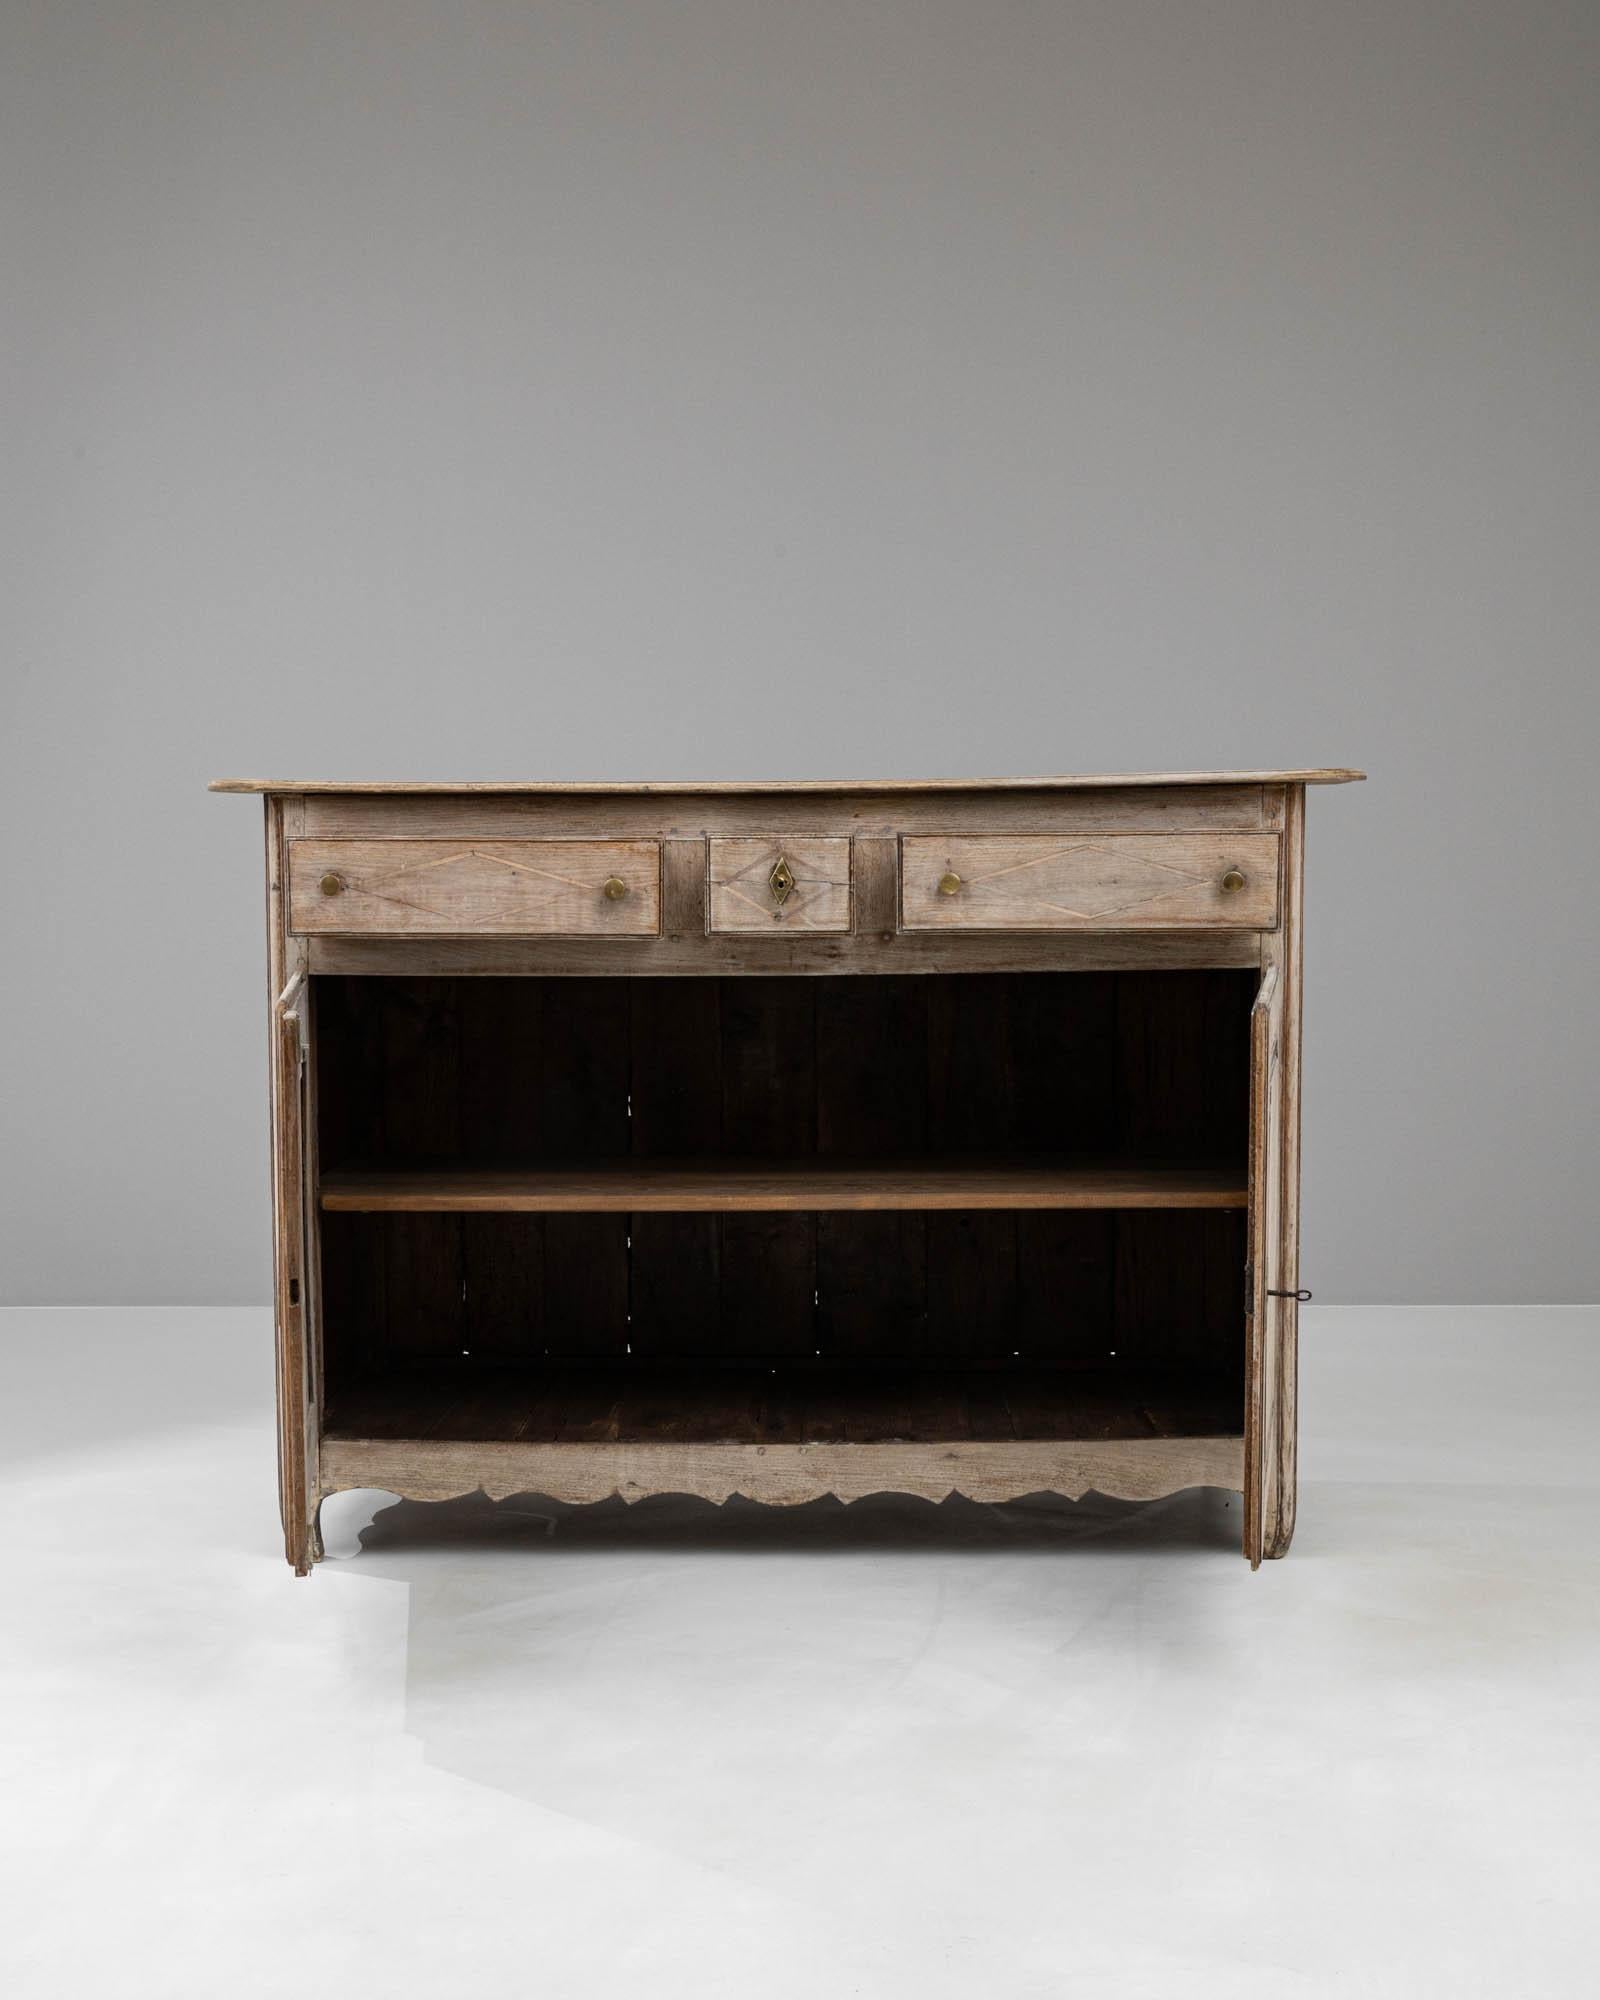 Transport yourself to the rustic French countryside with our 19th Century French Bleached Oak Buffet. This majestic piece brings the allure of vintage Provence into your home with its softly weathered bleached oak finish, infusing a touch of antique